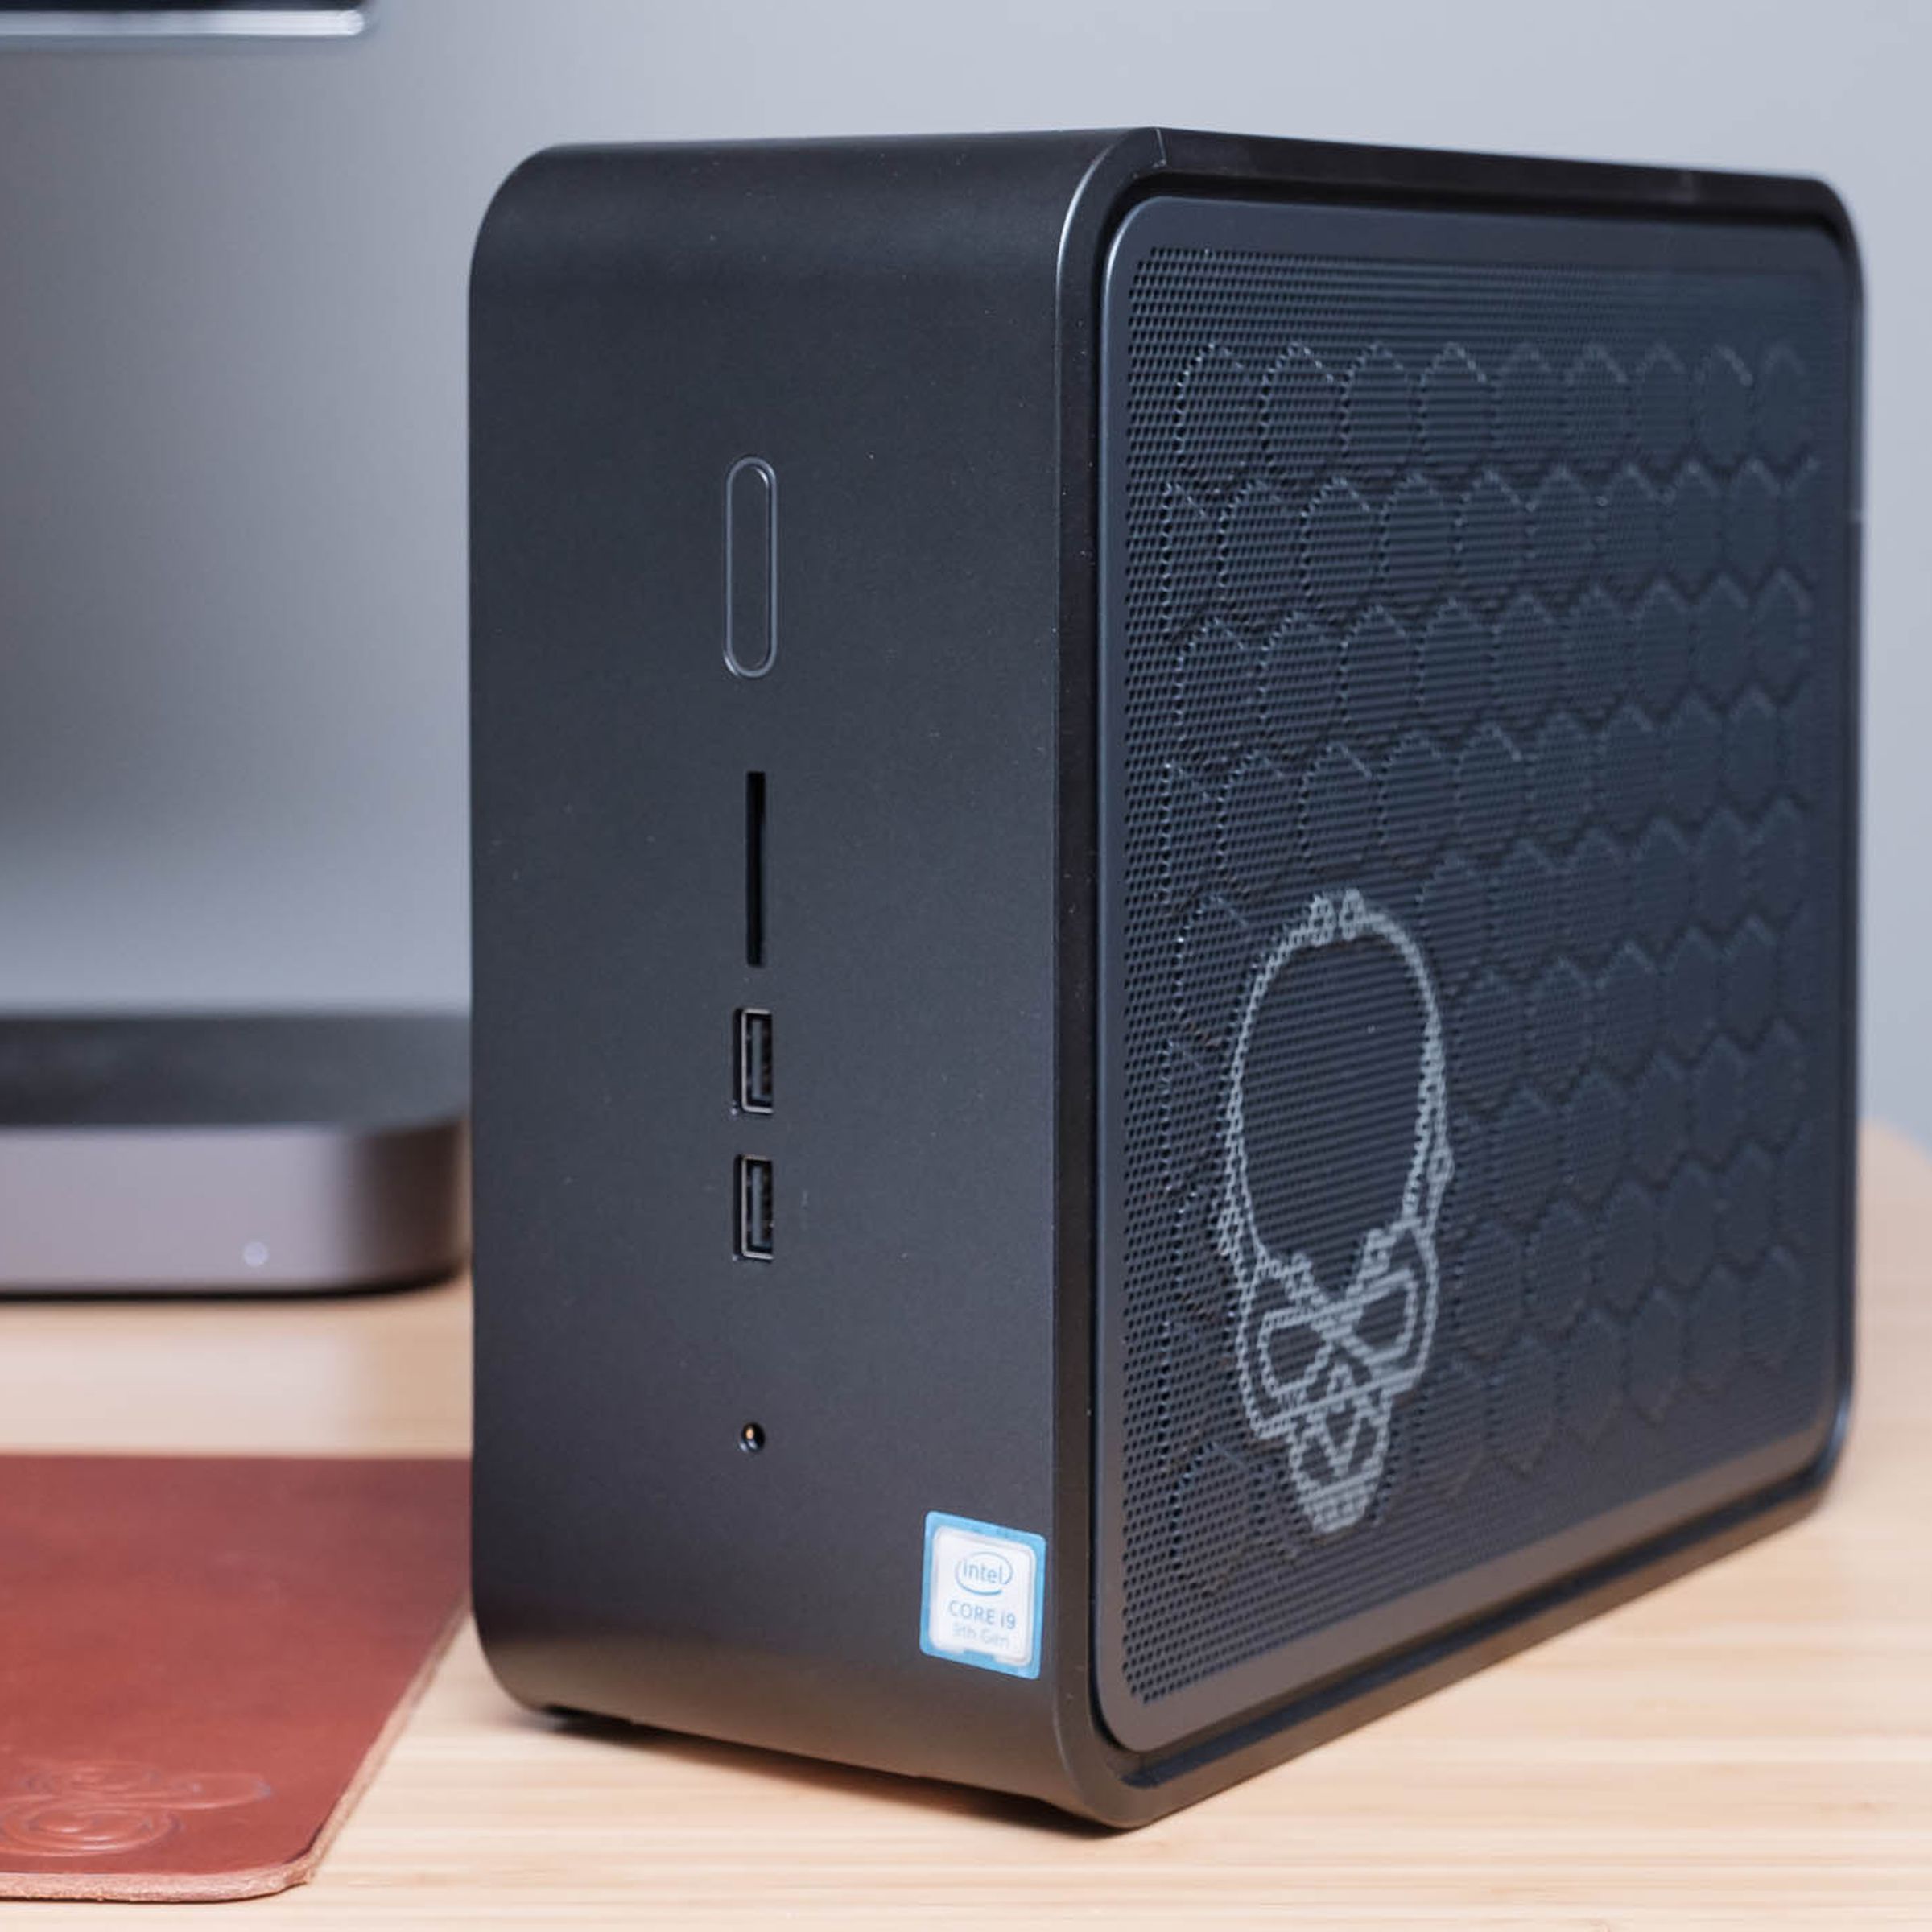 Intel NUC 9 computer standing vertically on a wood desk with a skull etched on the side and a gray Mac Mini in the background